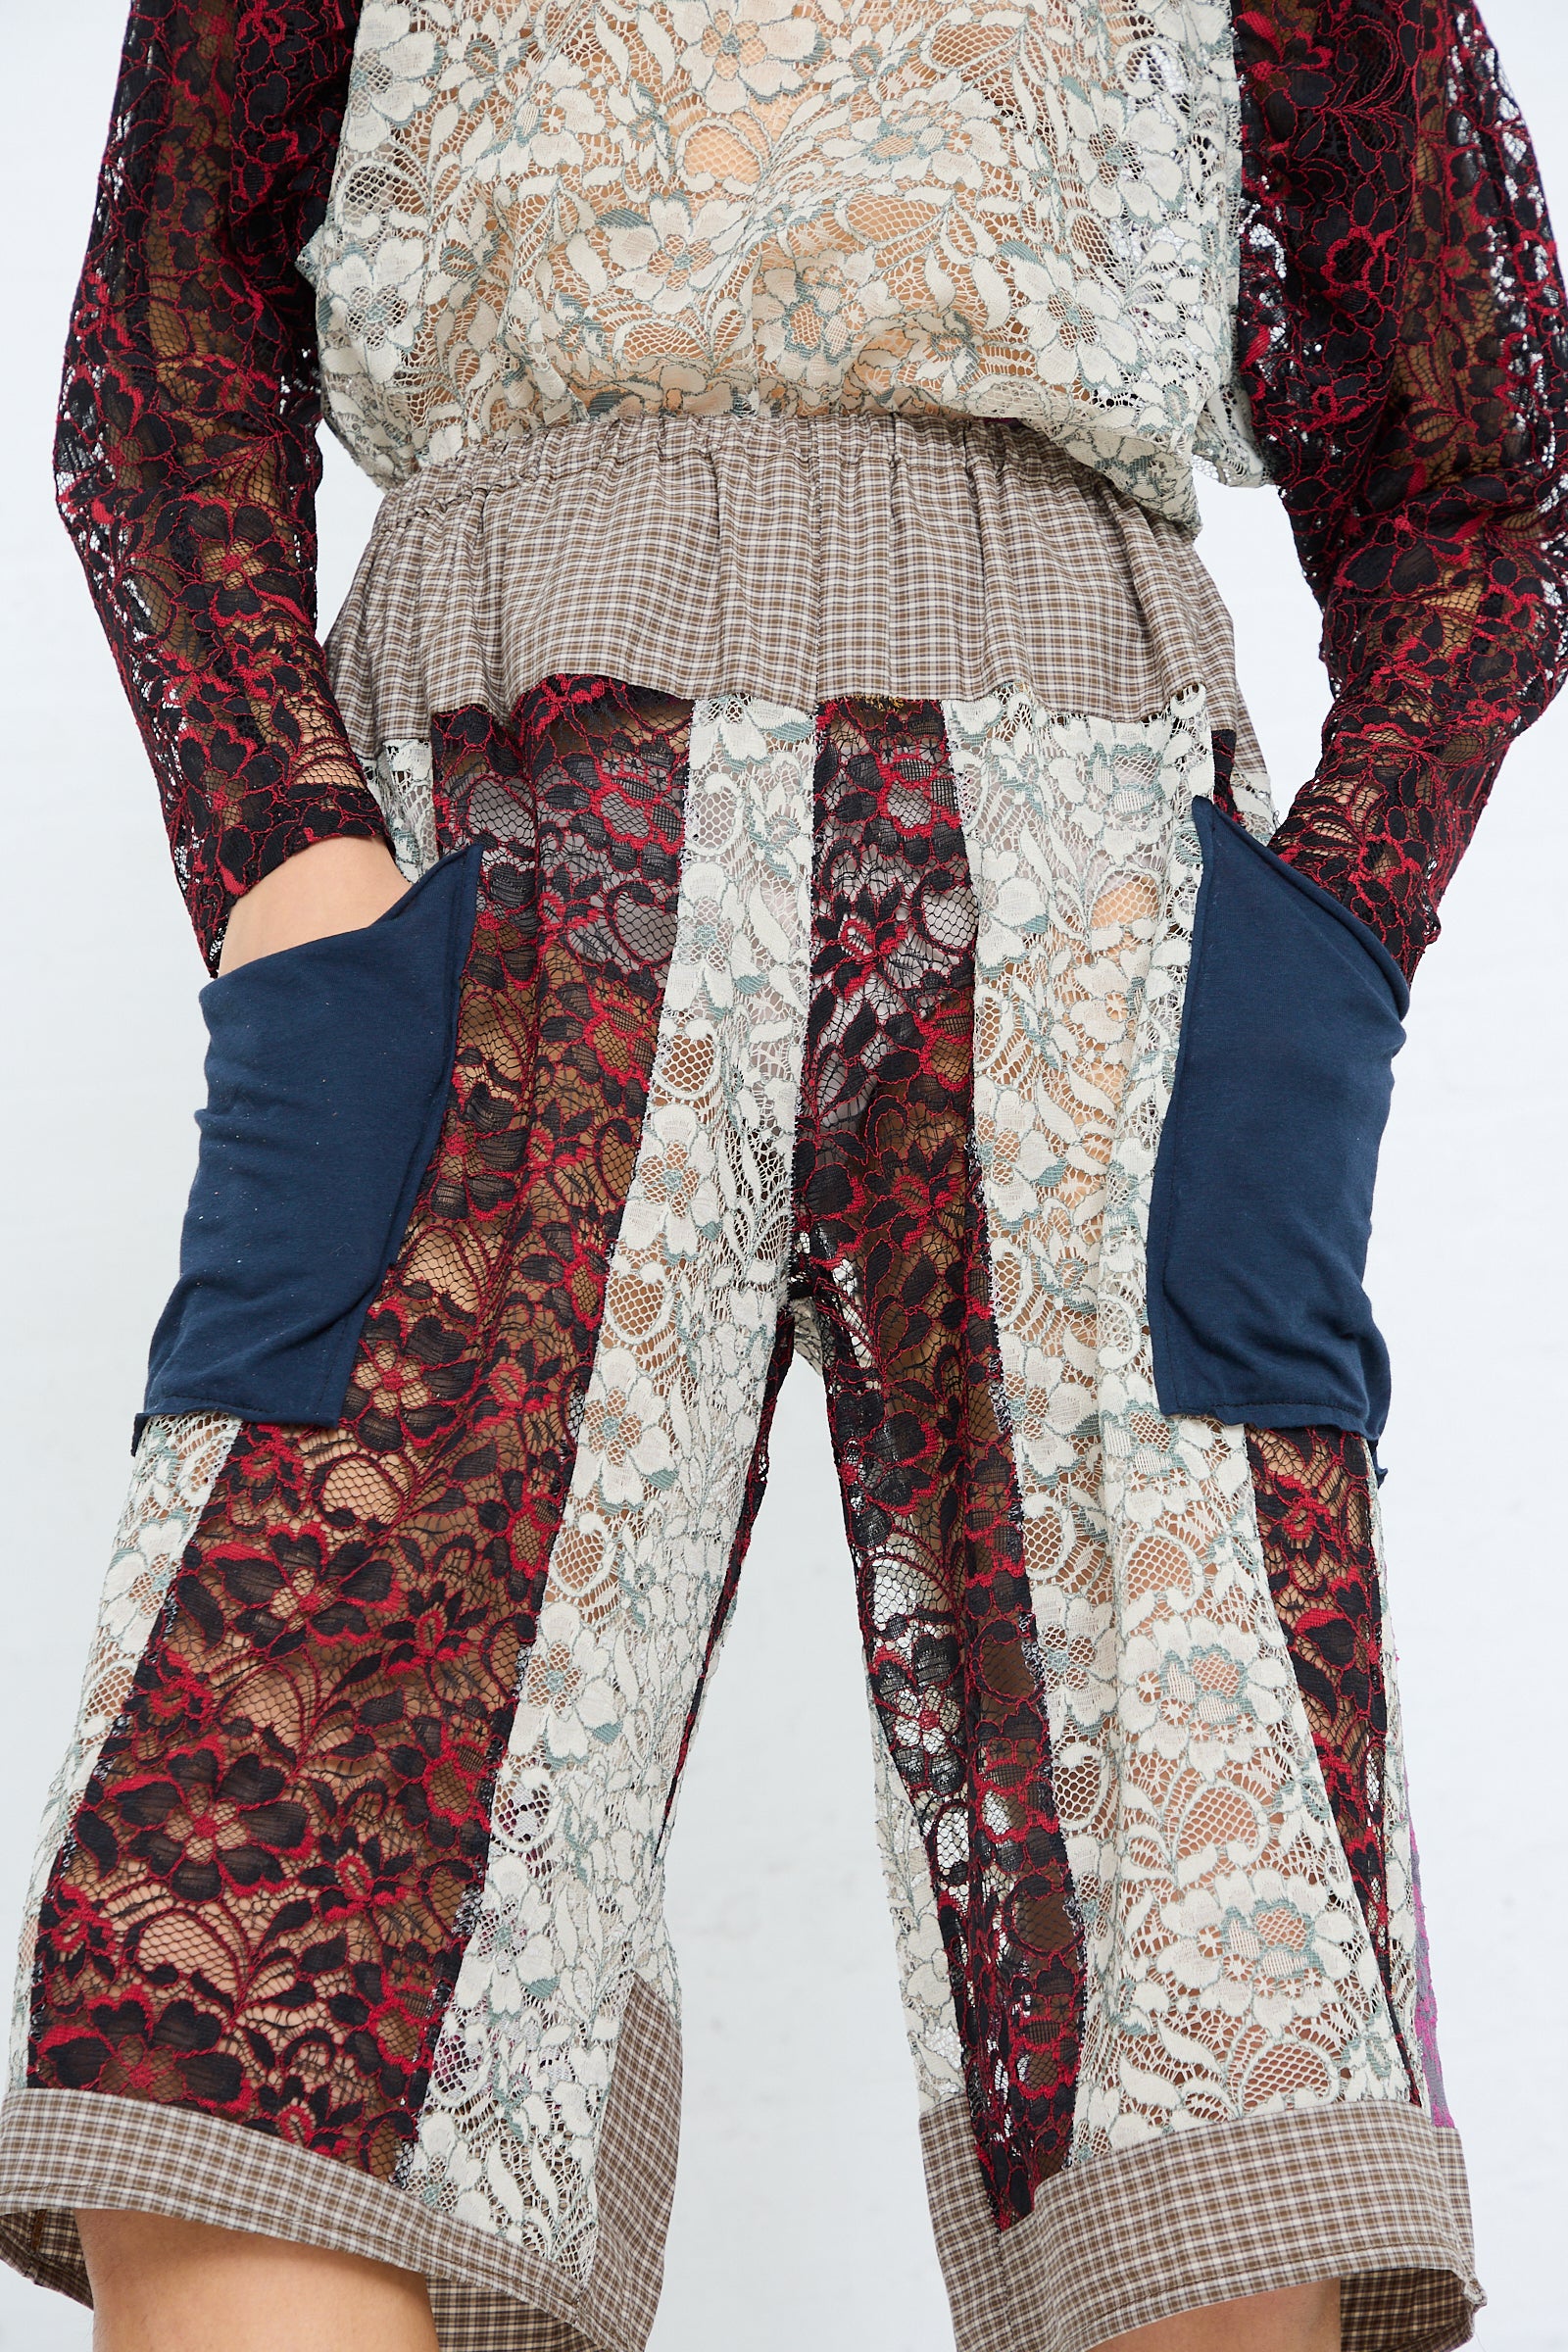 A person wearing an eclectic outfit with a patterned sleeve top, SC103 Lace Parallel Short in Thrash with an elasticated waist, and hands in pockets.